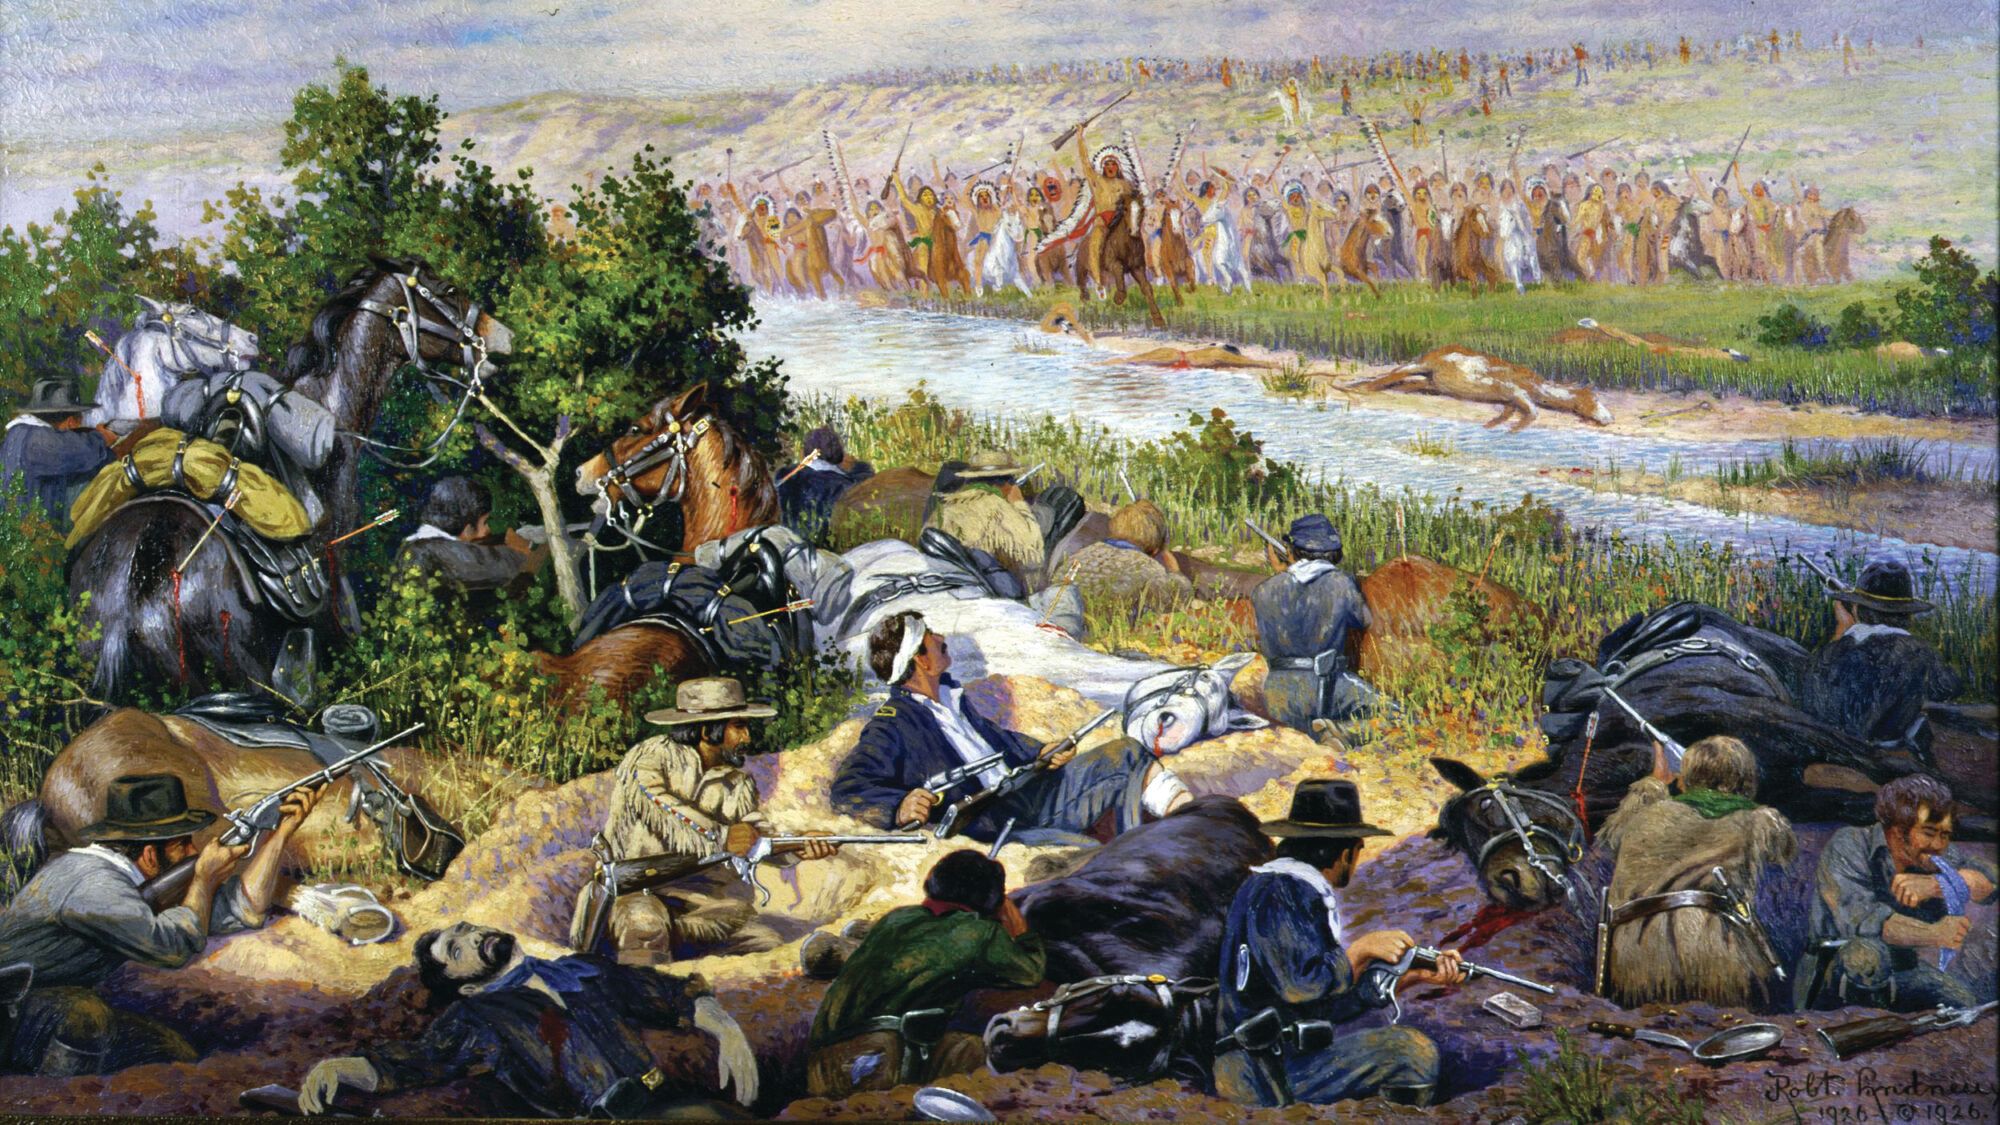 Roman Nose leads Oglala Sioux and Cheyenne warriors in a charge on Major George Forsyth’s (wounded, center) 50 cavalrymen armed with Spencers, dug in on Beecher Island. The warriors were shocked by the volume of fire coming from so few cavlrymen.